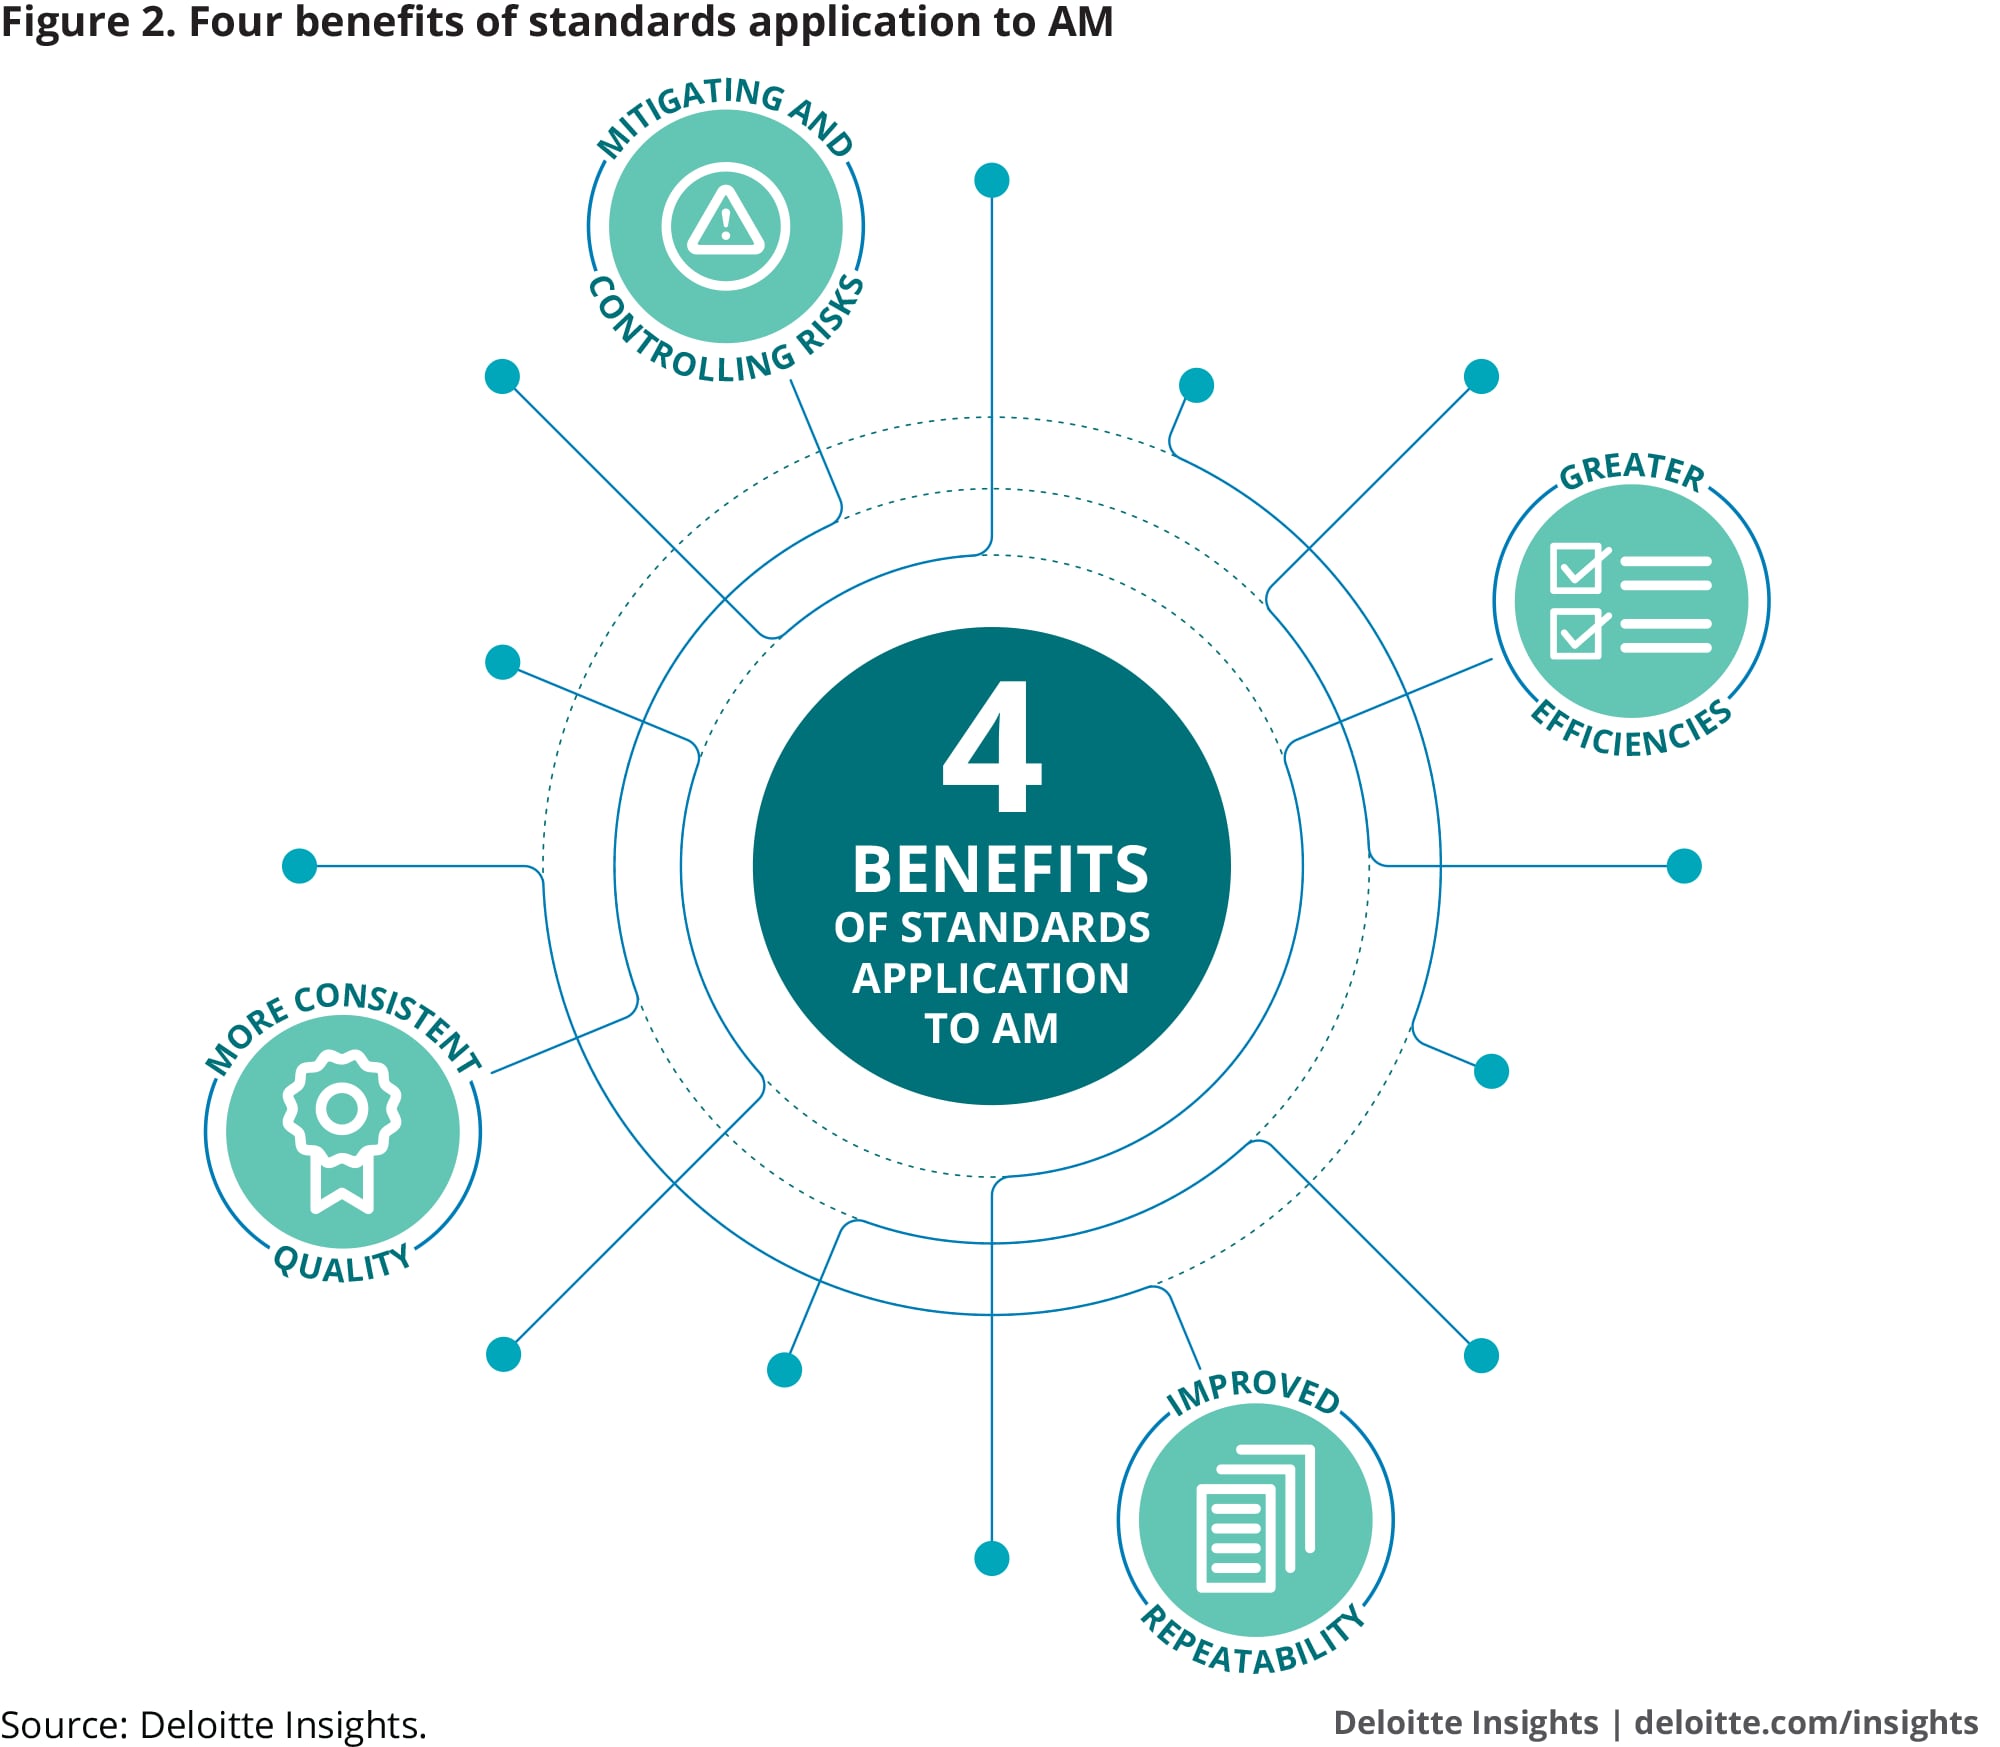 Four benefits of standards application to AM